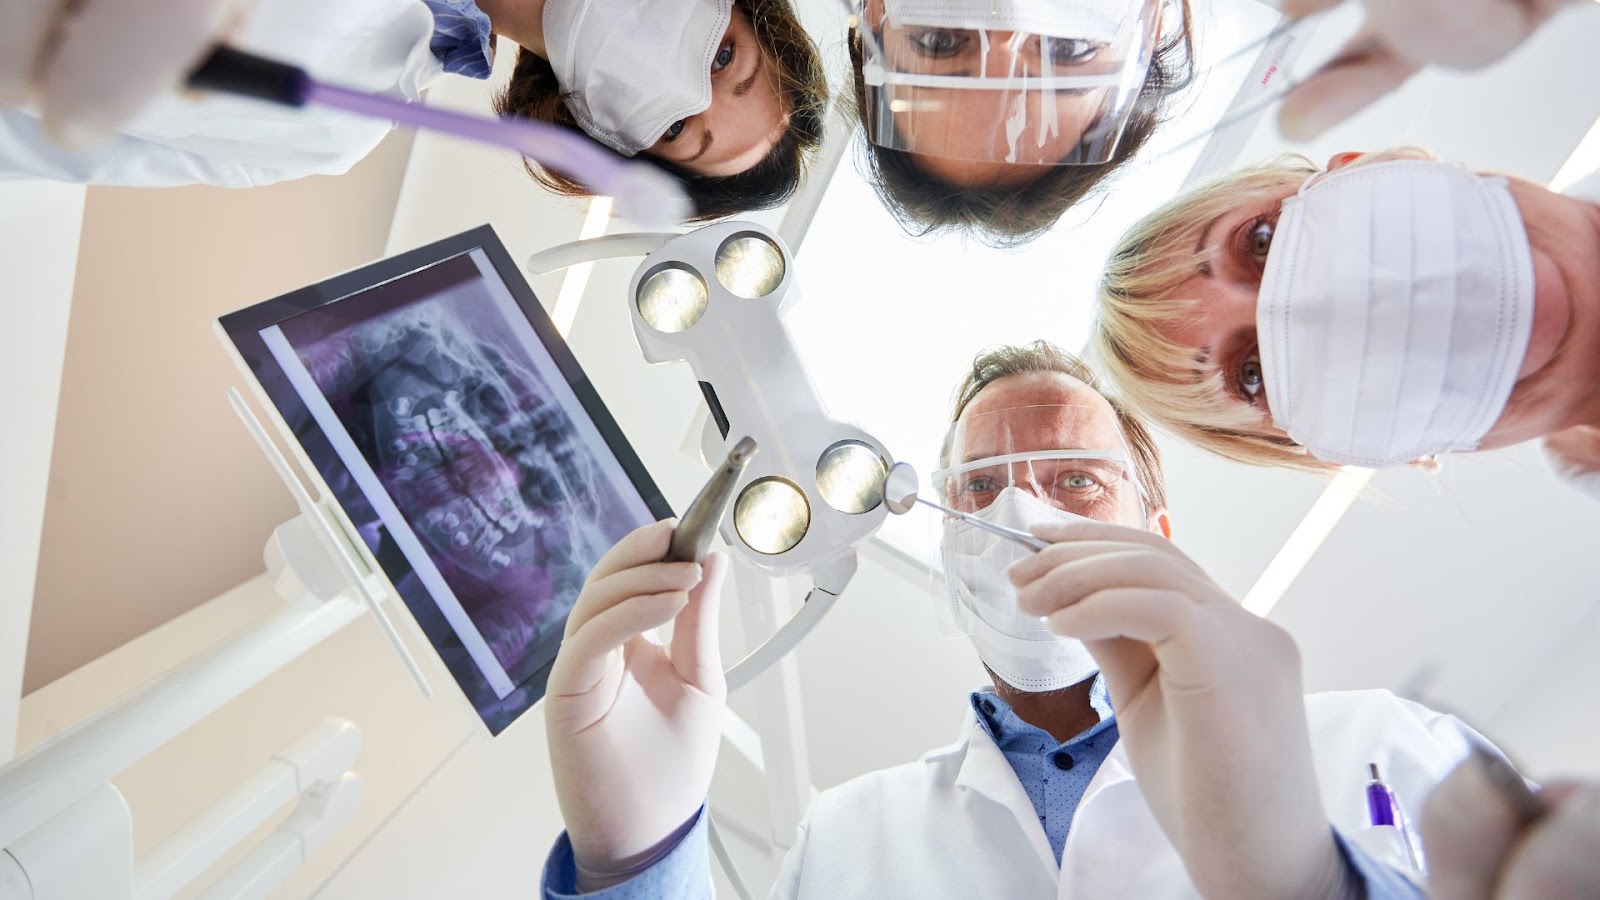 Part 1 Dental Implant Marketing – Achieving Great Results in Today’s Labor Climate